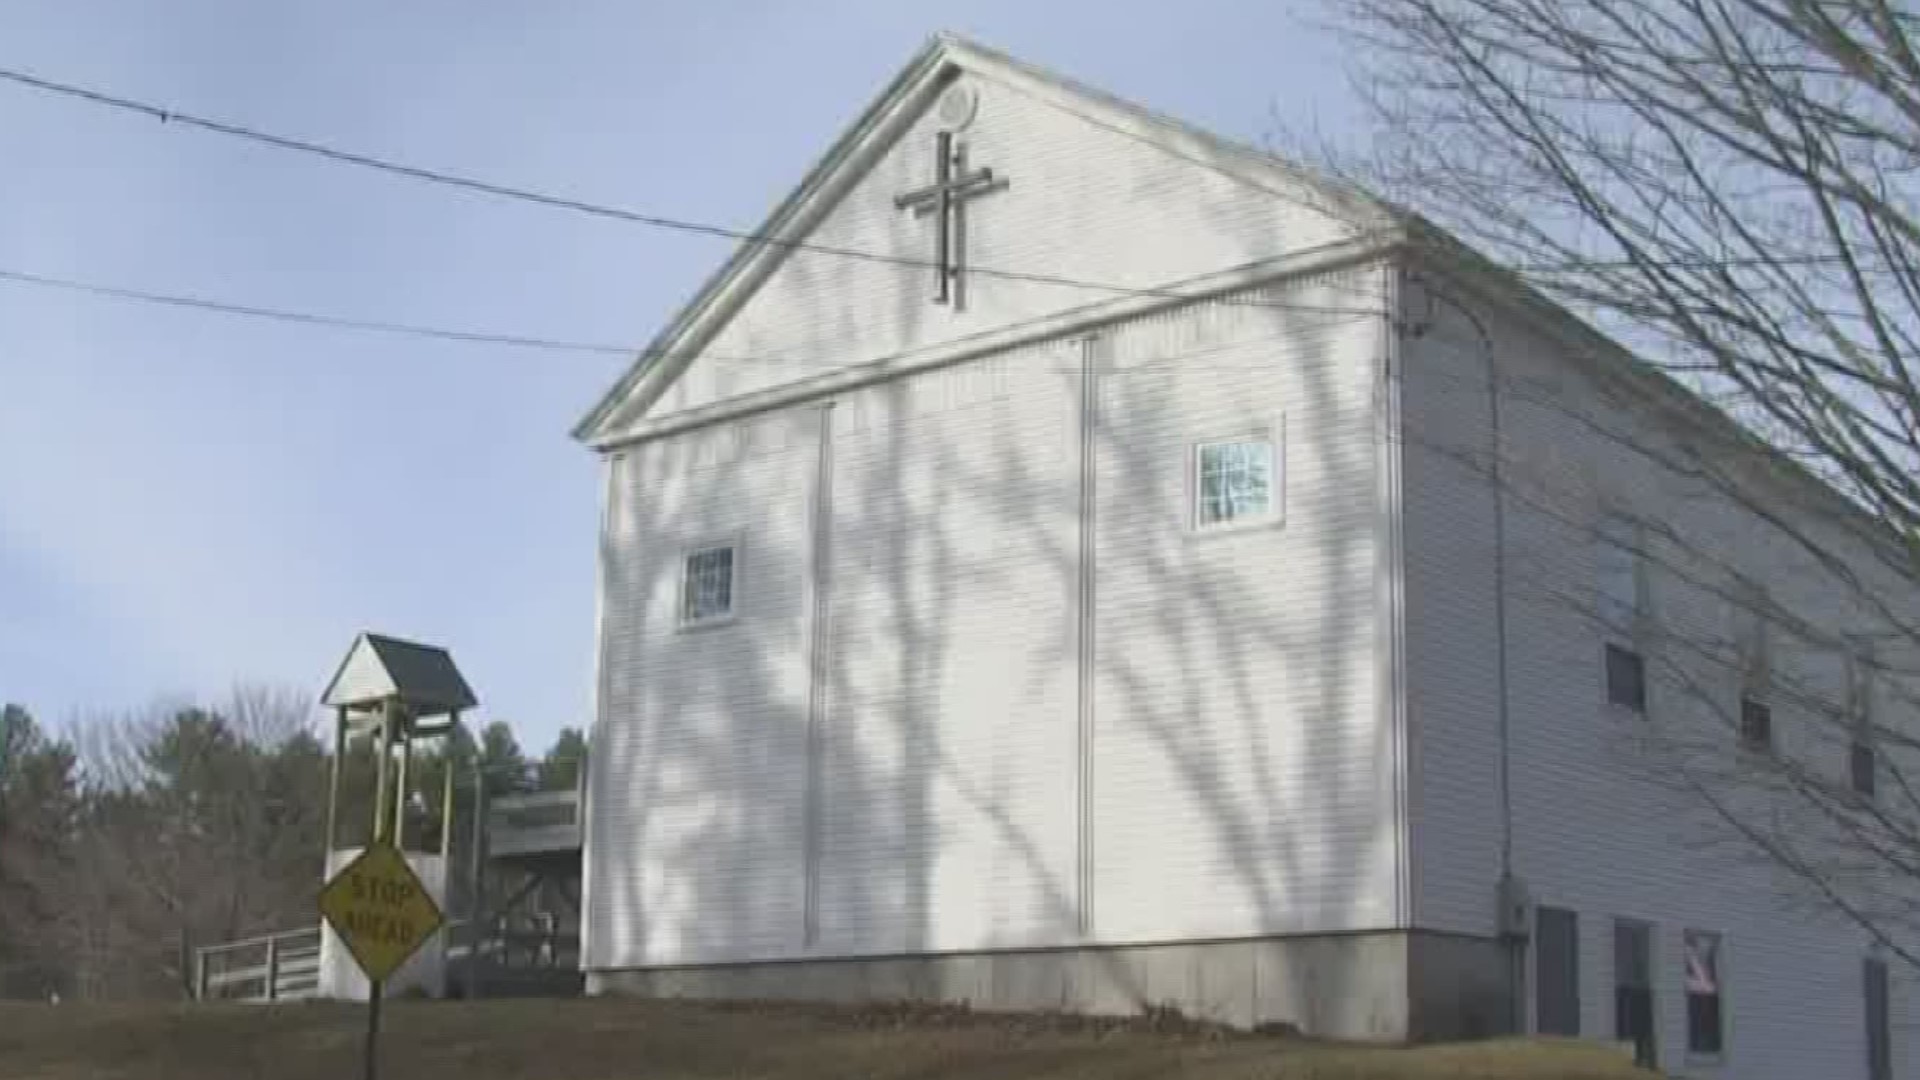 A pastor says Christmas toys donated to a Maine church where a meth lab was recently discovered in the playroom have been contaminated and cannot be given out to chi